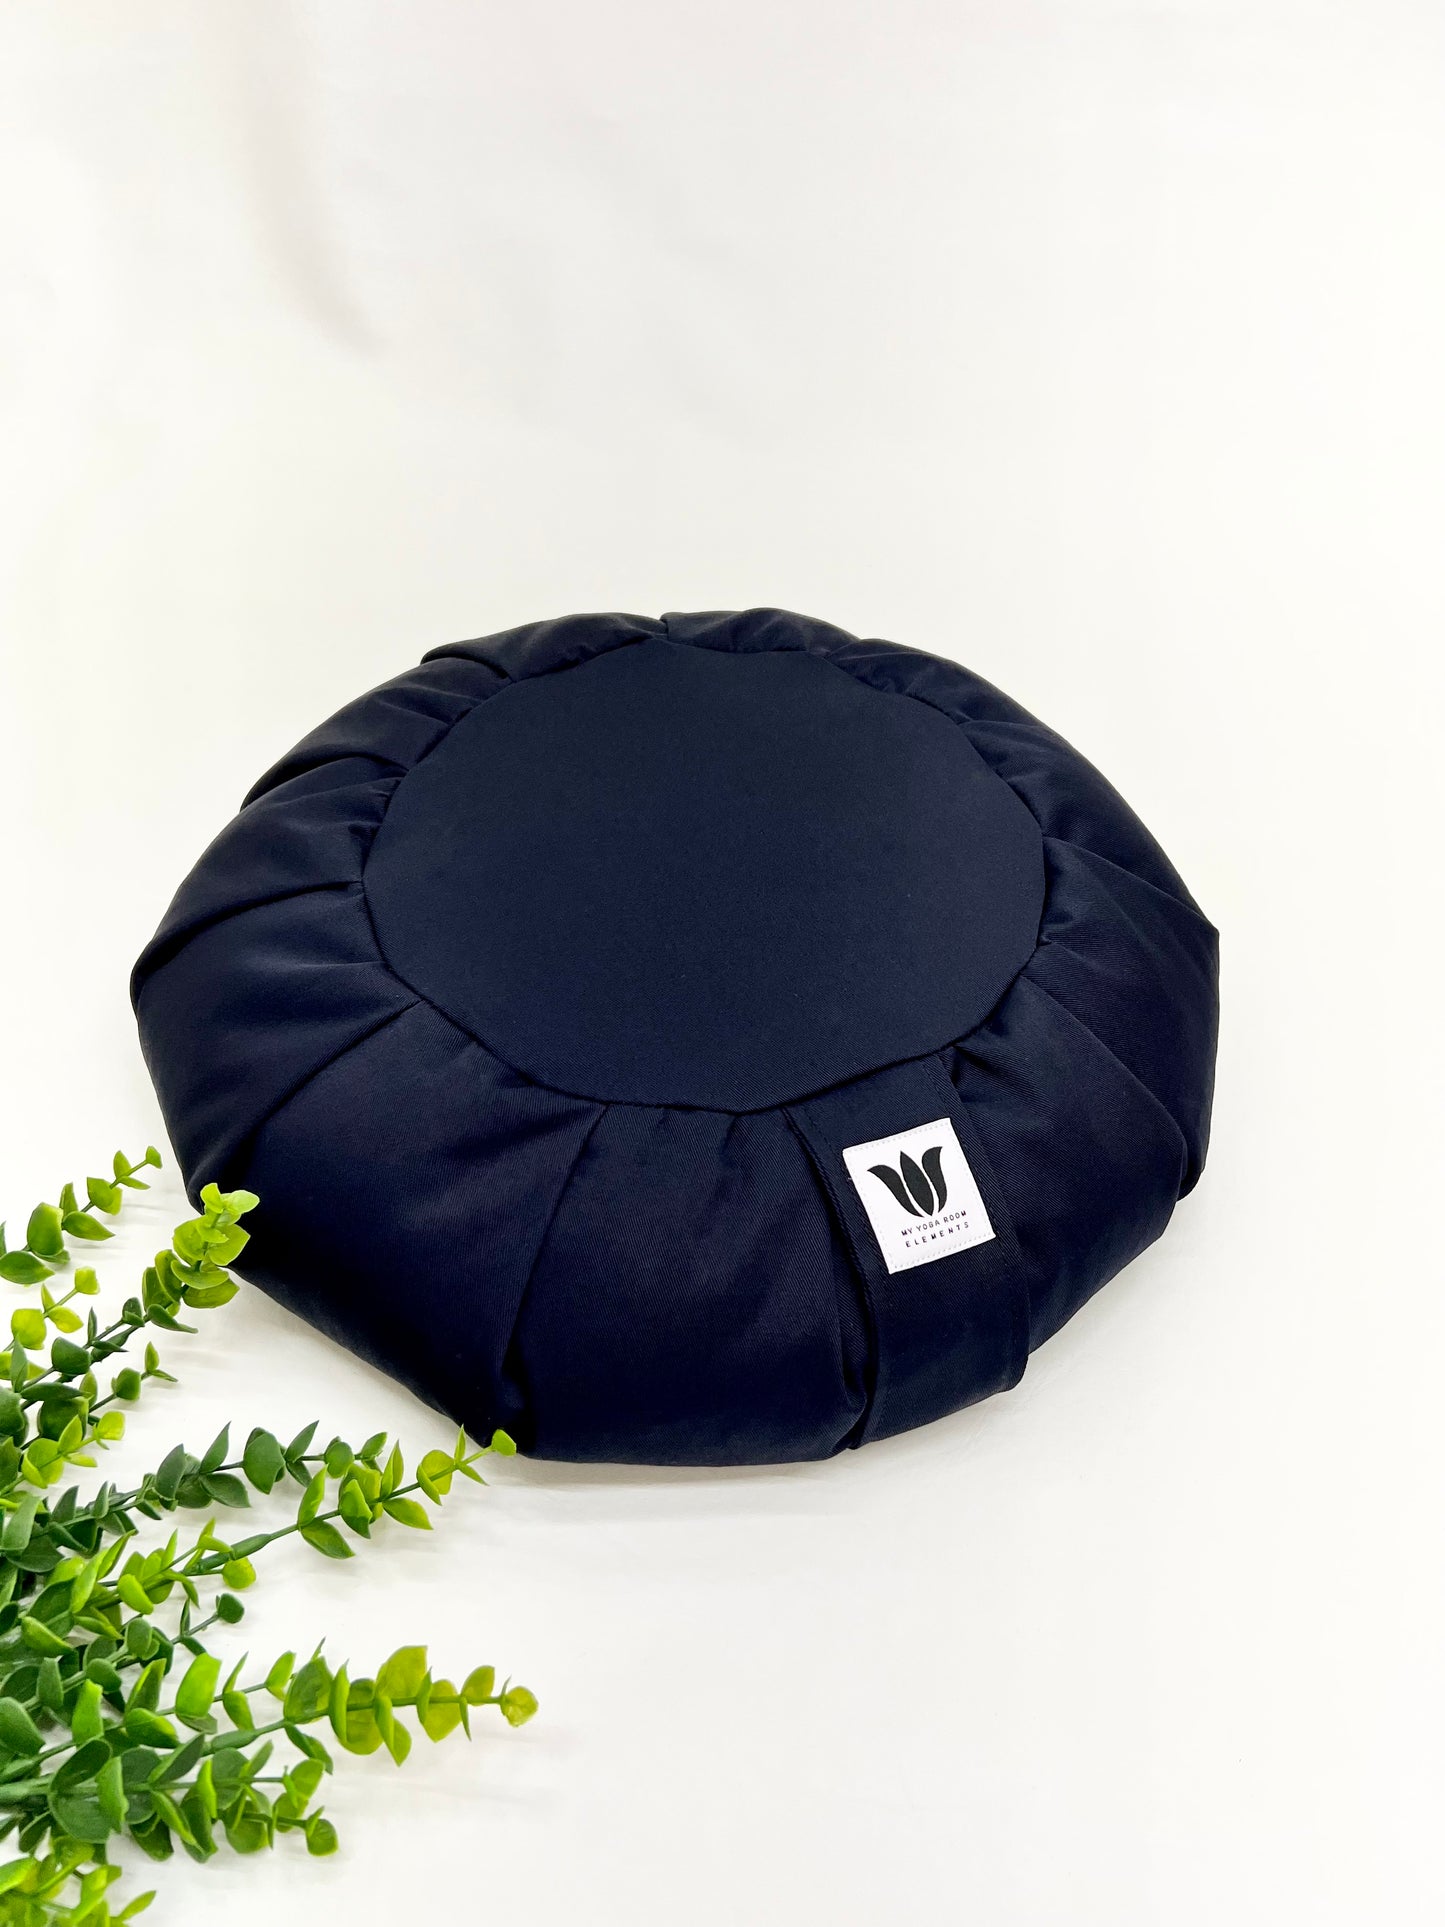 Handcrafted premium cotton canvas fabric meditation seat cushion in solid navy blue fabric. Align the spine and body in comfort to calm the monkey mind in your meditation practice. Handcrafted in Calgary, Alberta Canada